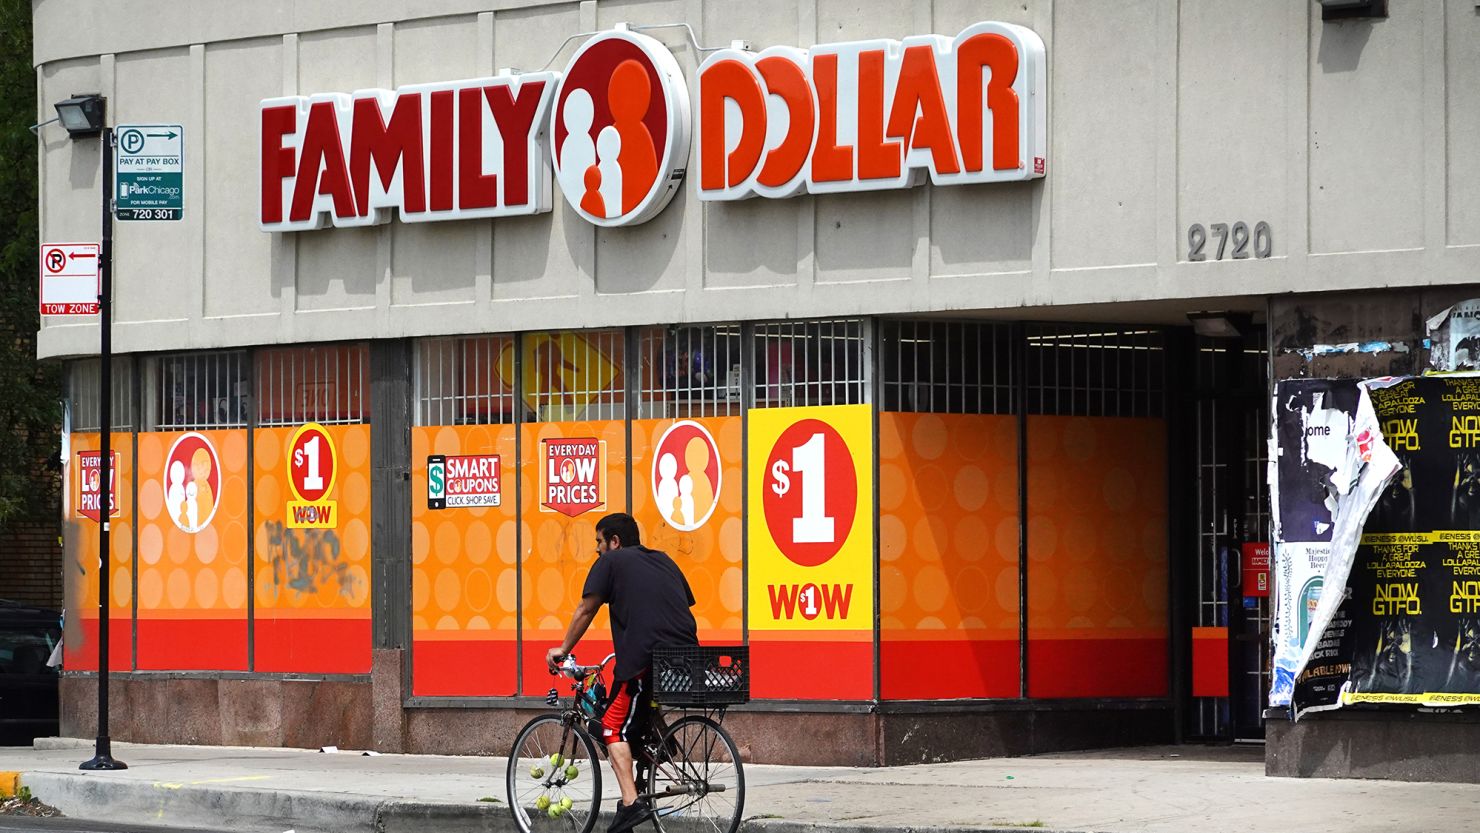 Dollar Tree May Sell Family Dollar After Years Together What's Next for Shoppers--